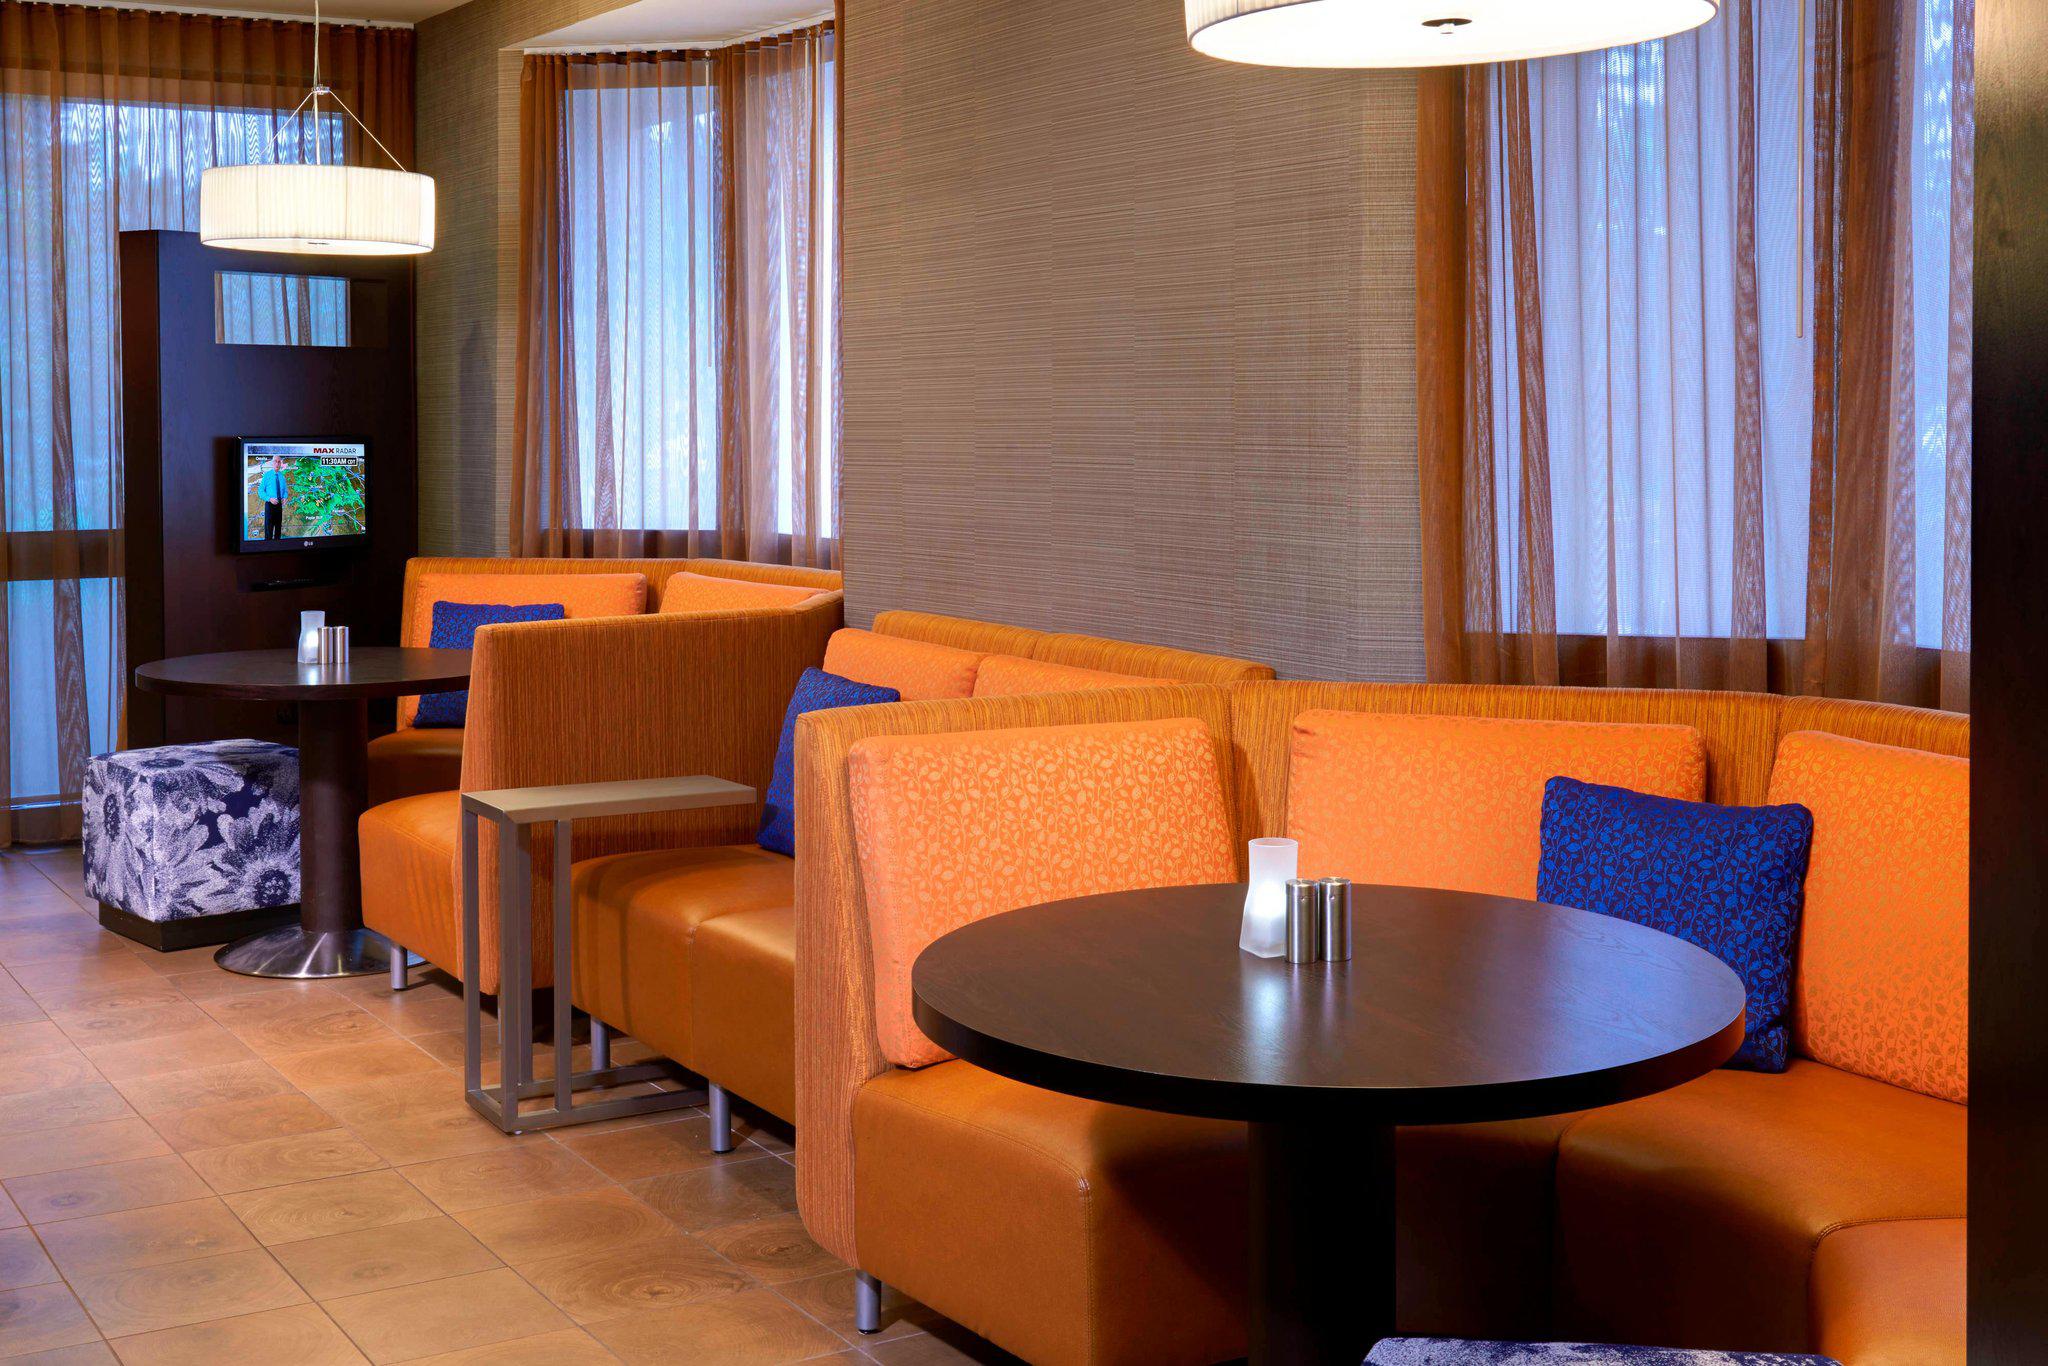 Courtyard by Marriott Chicago Elgin/West Dundee Photo